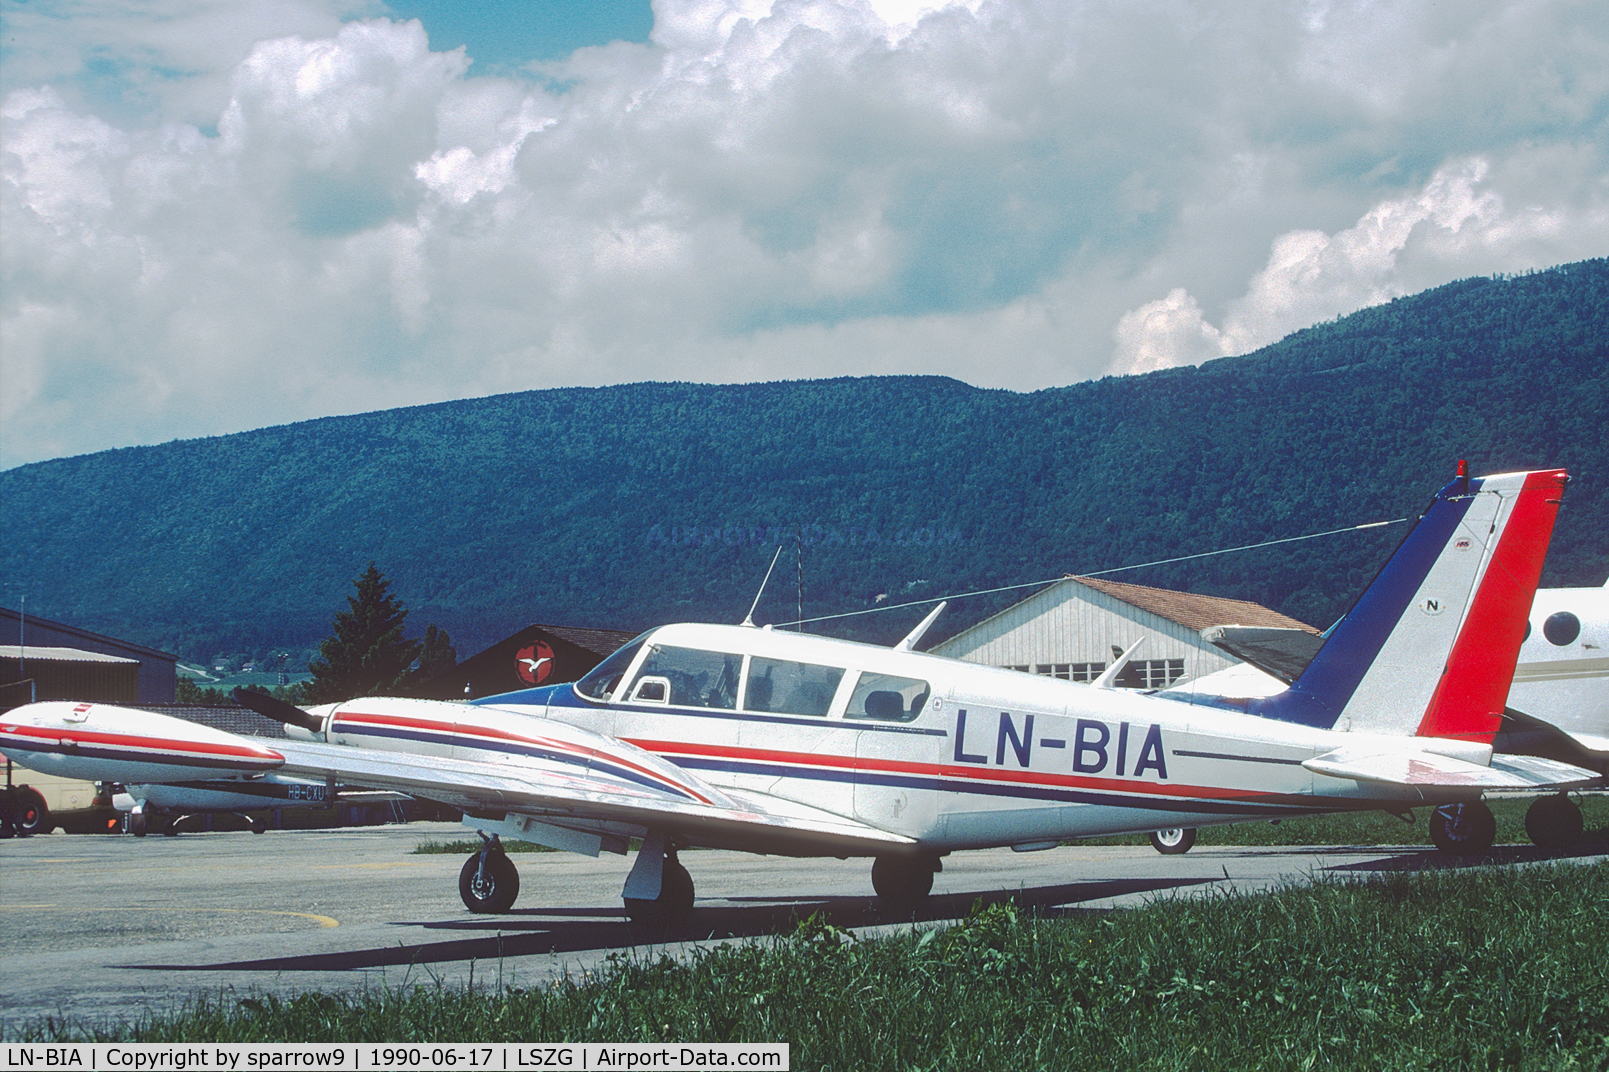 LN-BIA, 1971 Piper PA-39 Twin Comanche C/R C/N 39-129, At Grenchen. Crashed in Norway. Scanned from a slide.